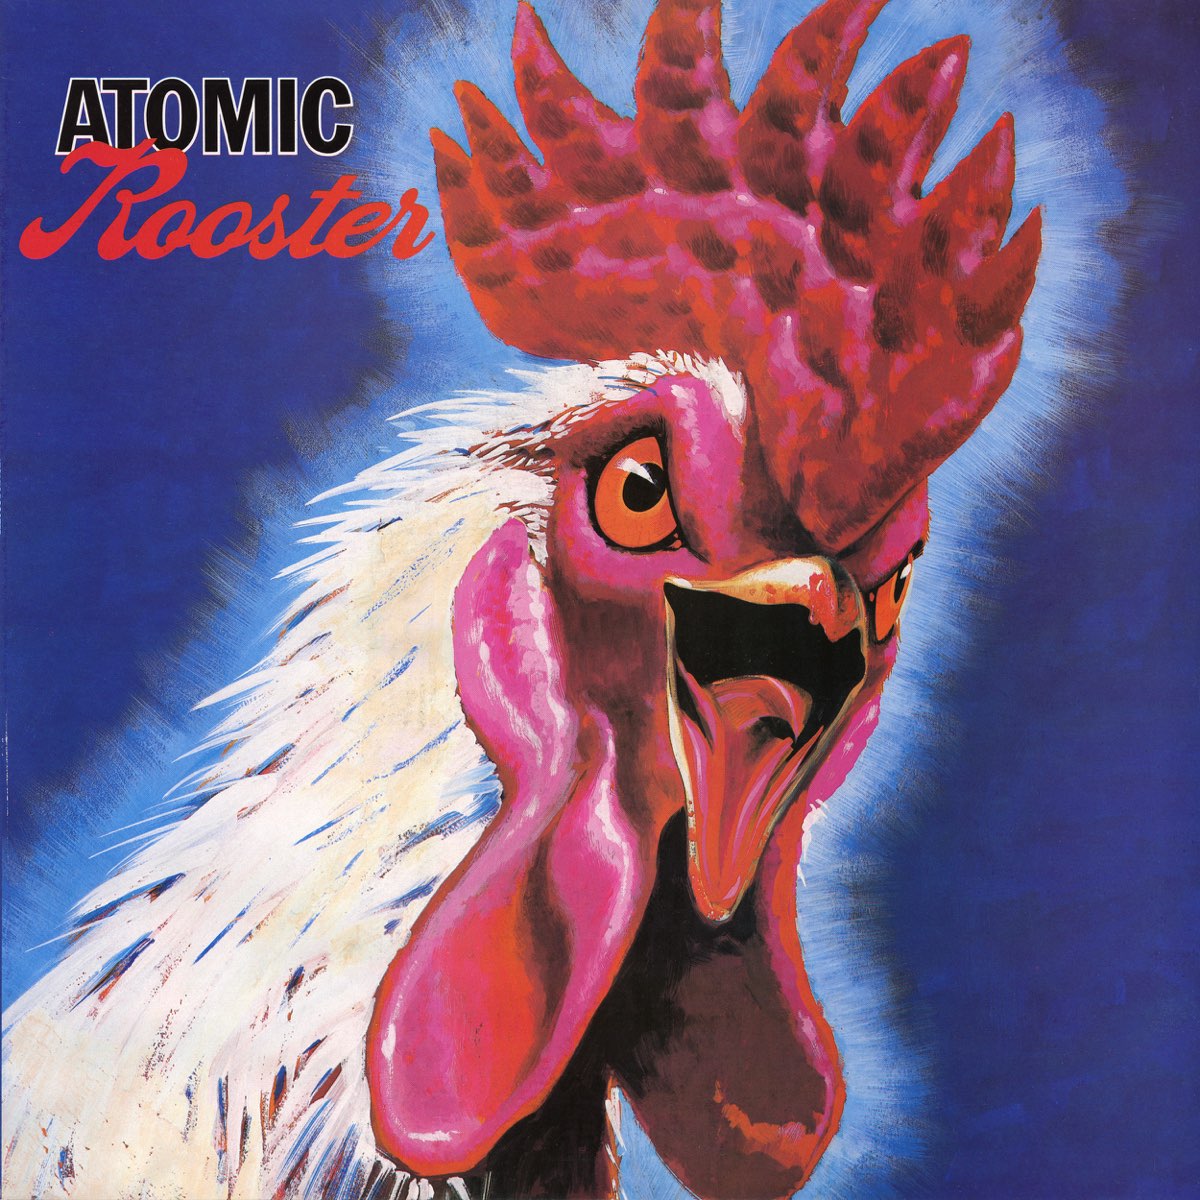 Atomic Rooster - Album by Atomic Rooster - Apple Music